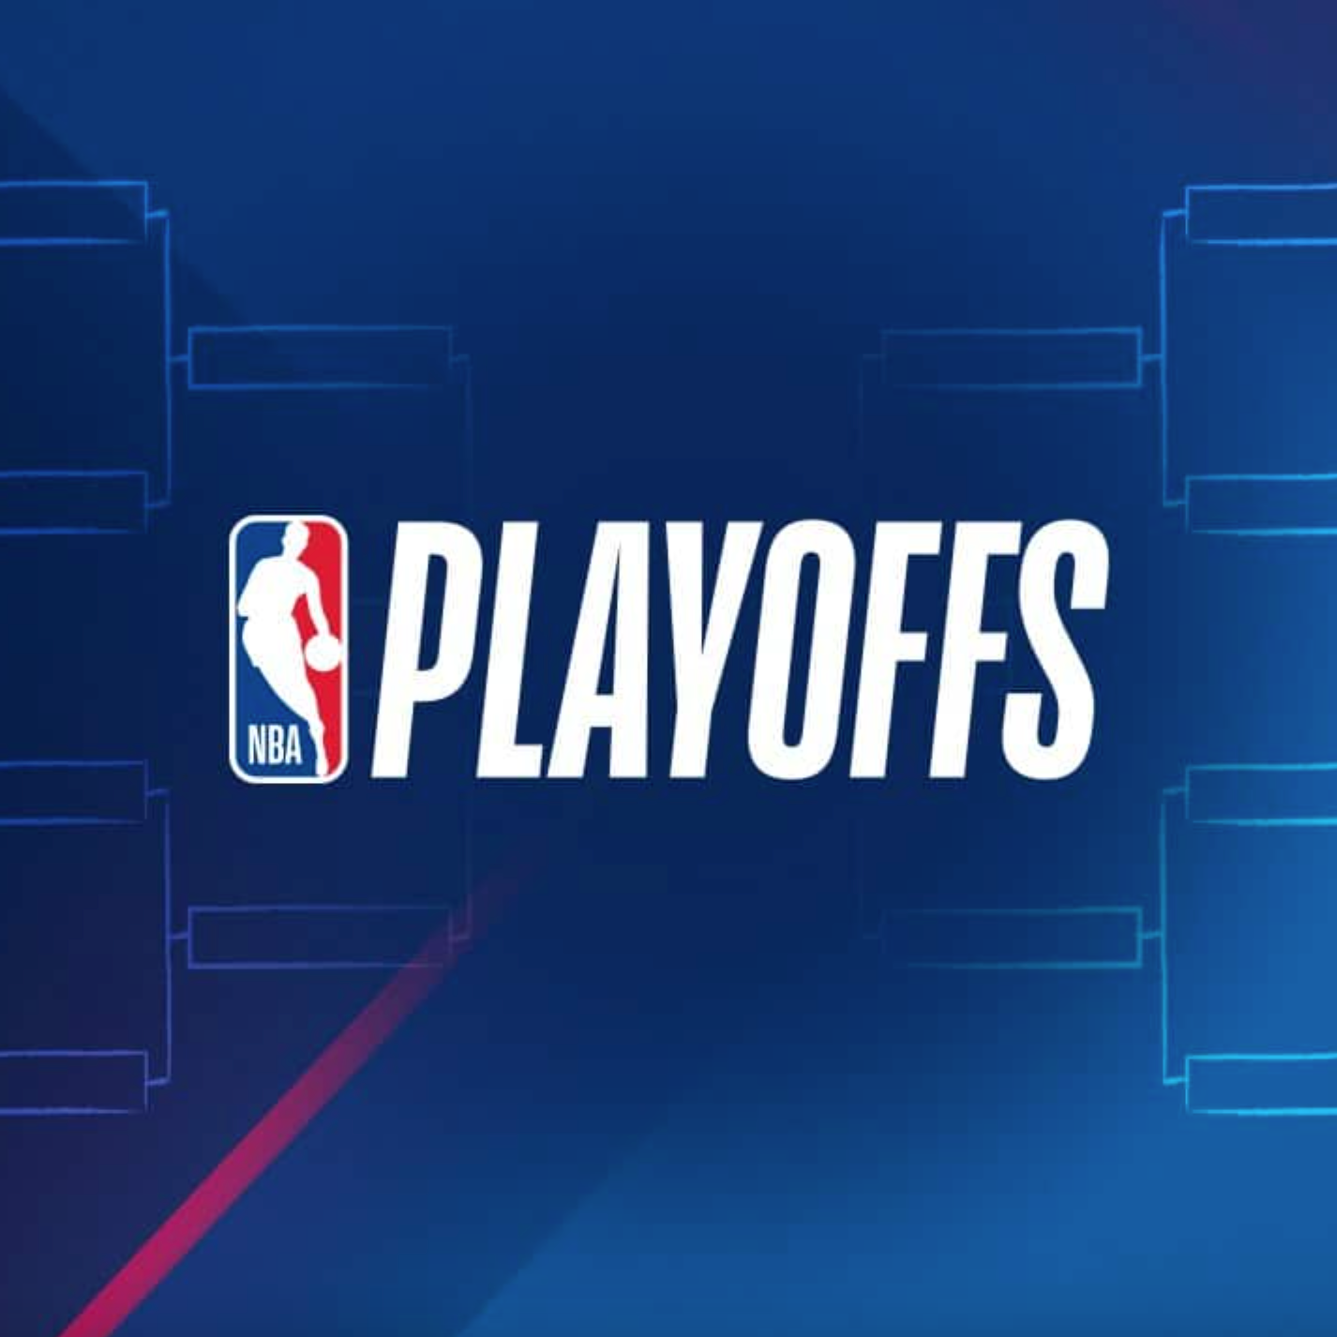 Stream NBA Finals 2023:Live stream Free Miami Heat vs. Denver Nuggets -  How, When & Where to Watch by NBA Finals 2023